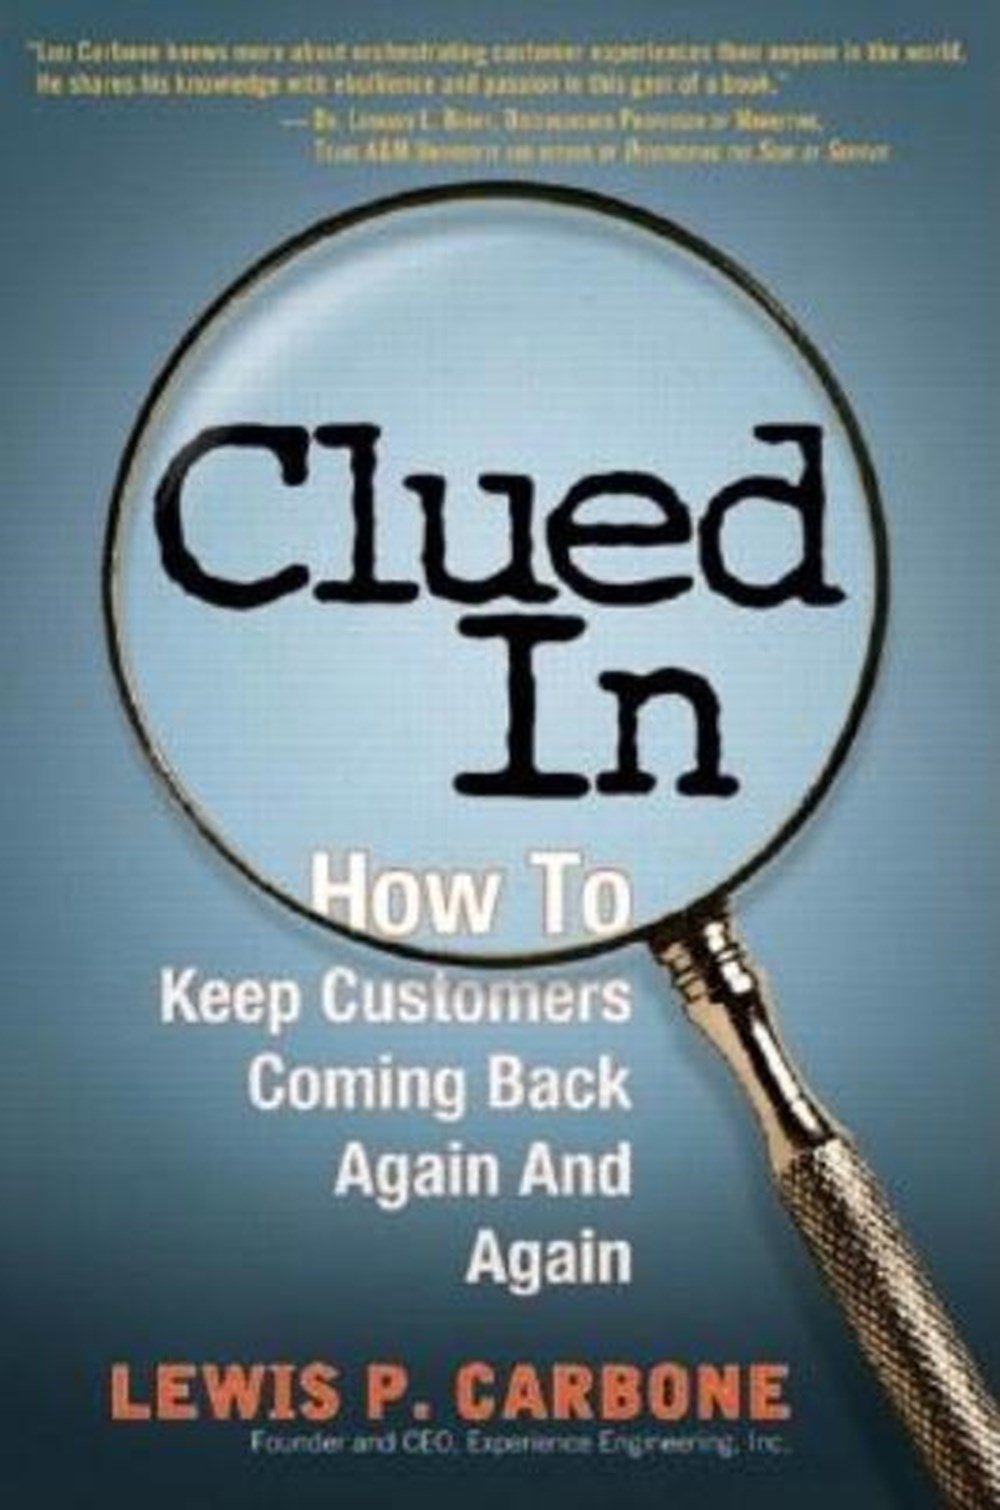 Clued in How to Keep Customers Coming Back Again and Again